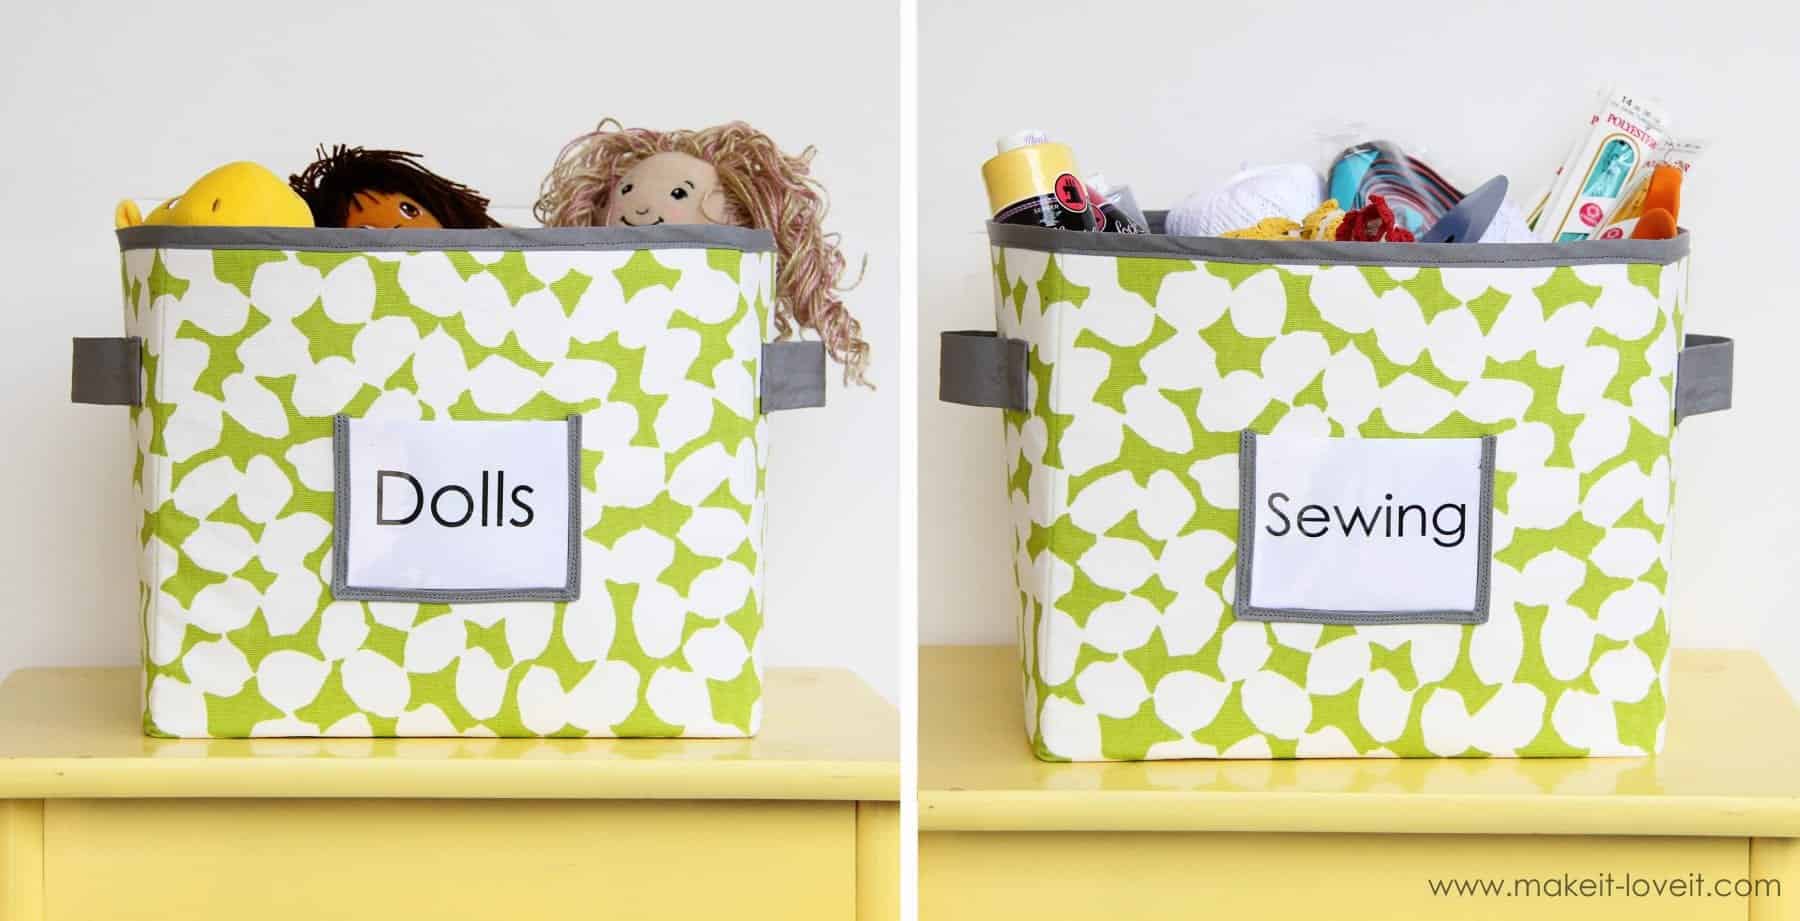 Two fabric bins with lime green and white fabric, with gray lining, trim and handles; each bin is labeled identifying what is in them, the first is labeled Dolls and the second is labeled sewing